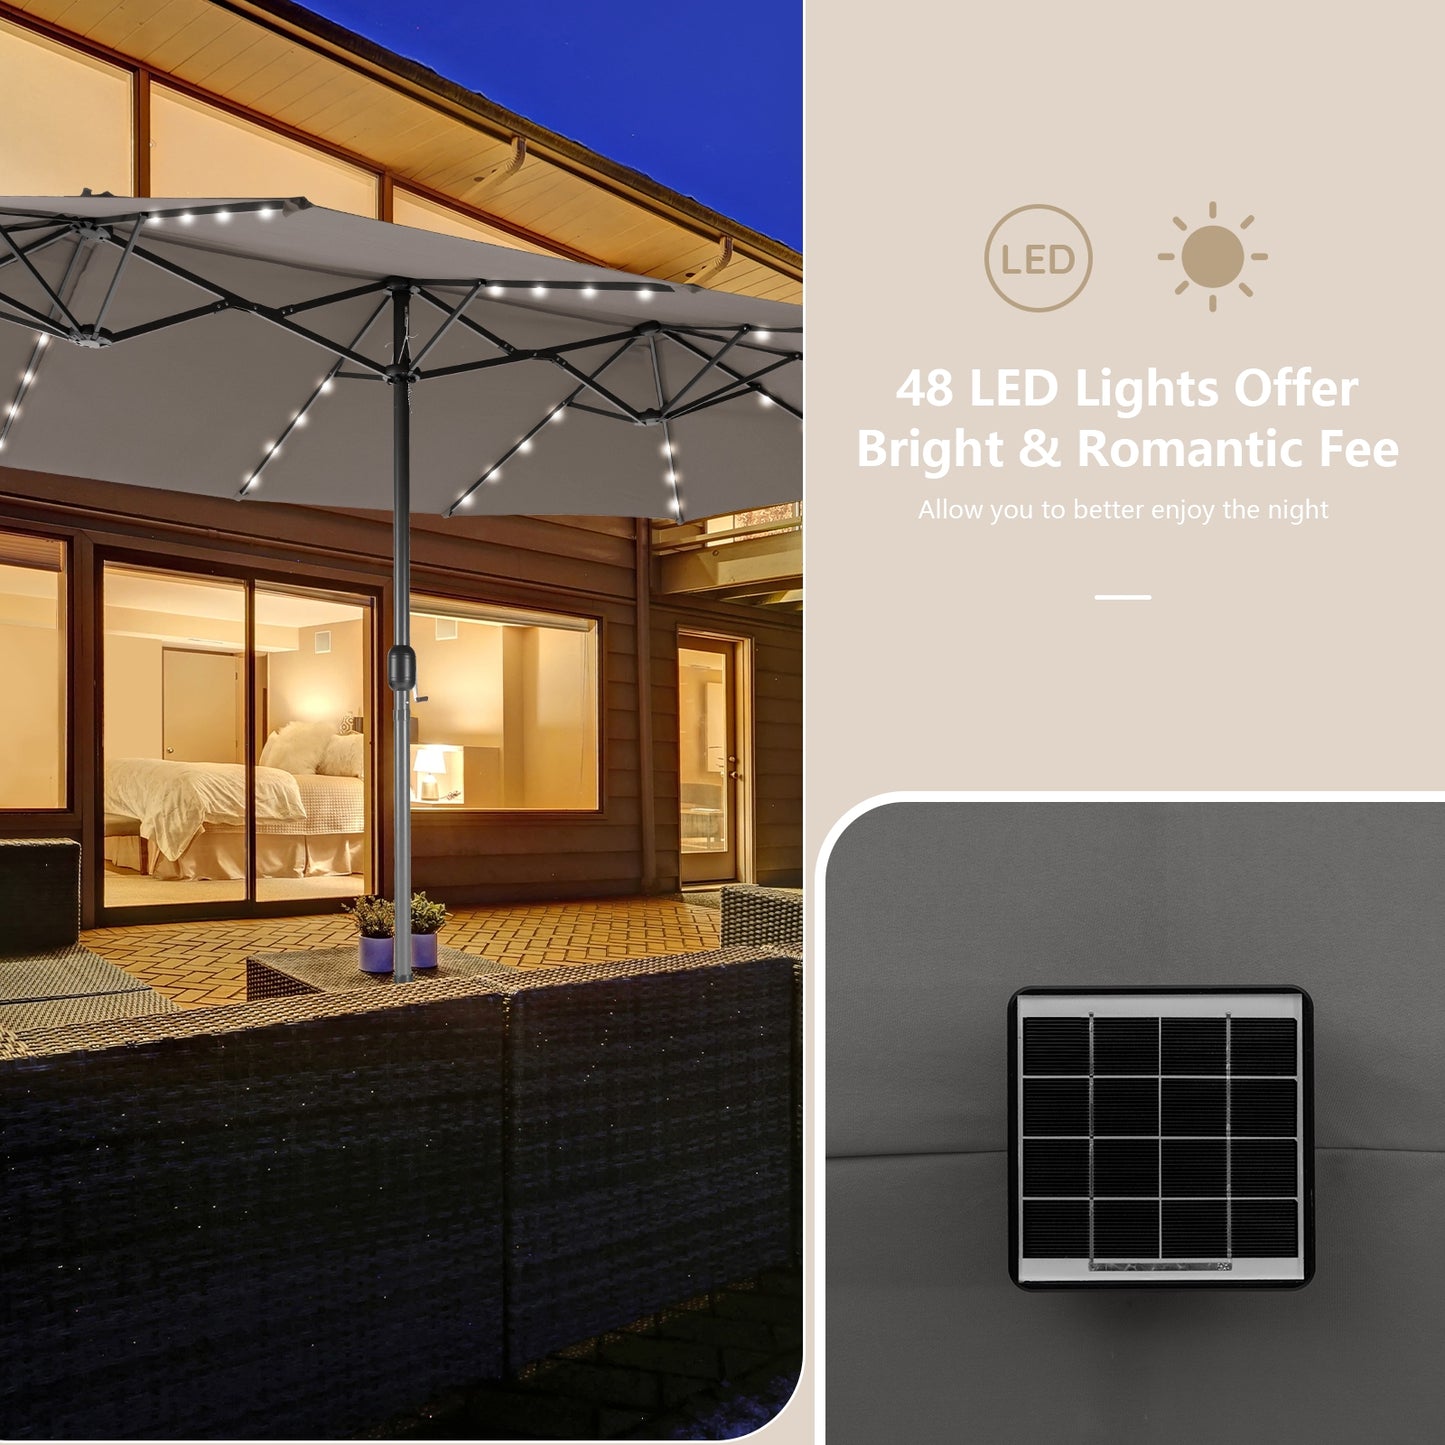 15 Feet Double-Sided Patio Umbrella with 48 LED Lights-Gray